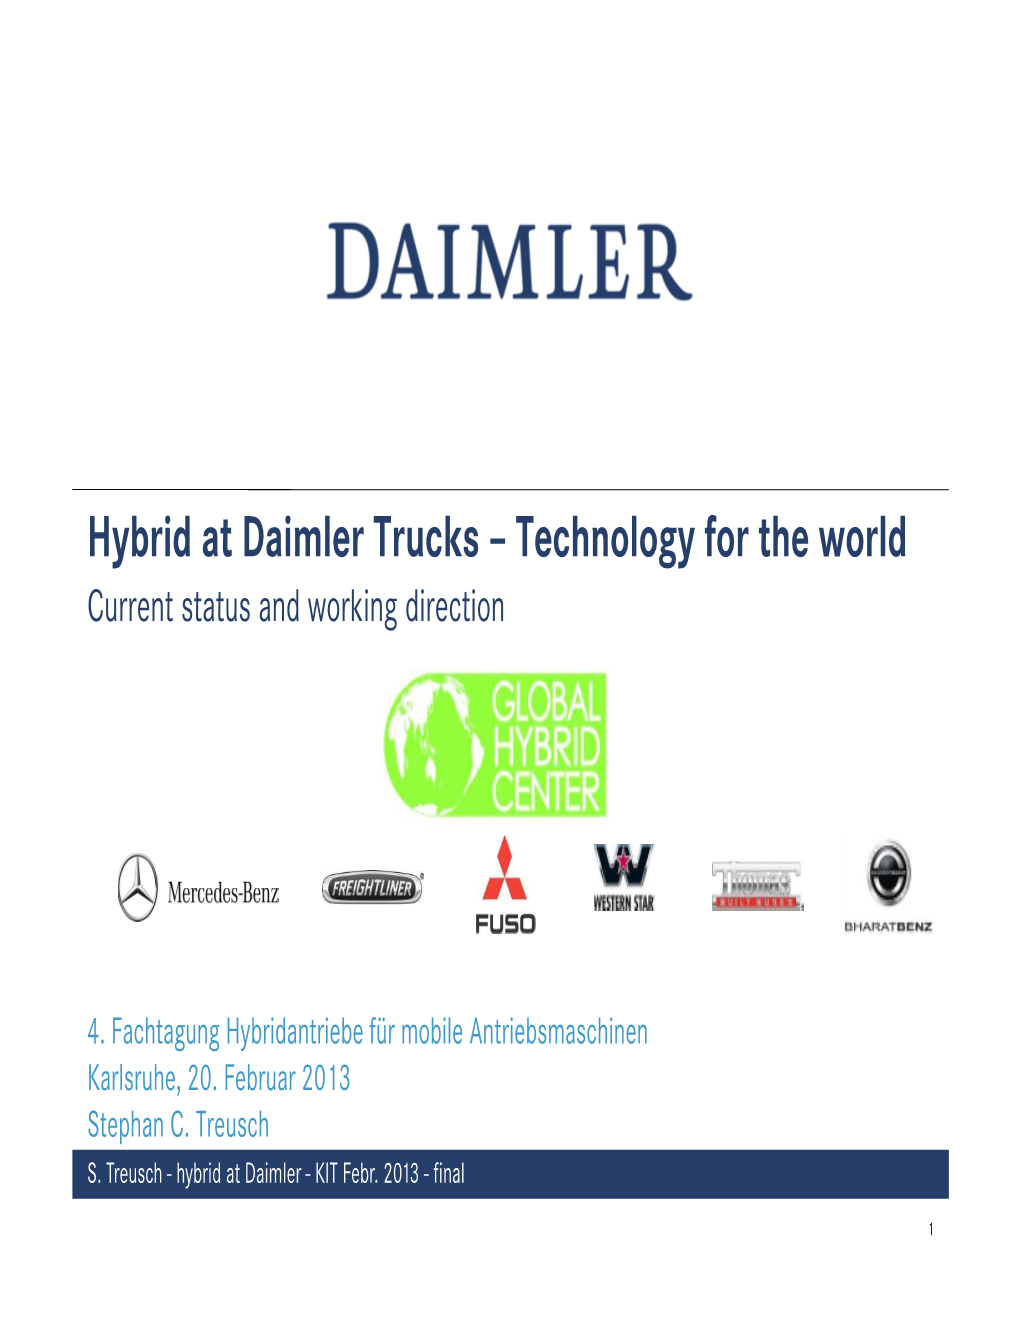 Hybrid at Daimler Trucks – Technology for the World Current Status and Working Direction